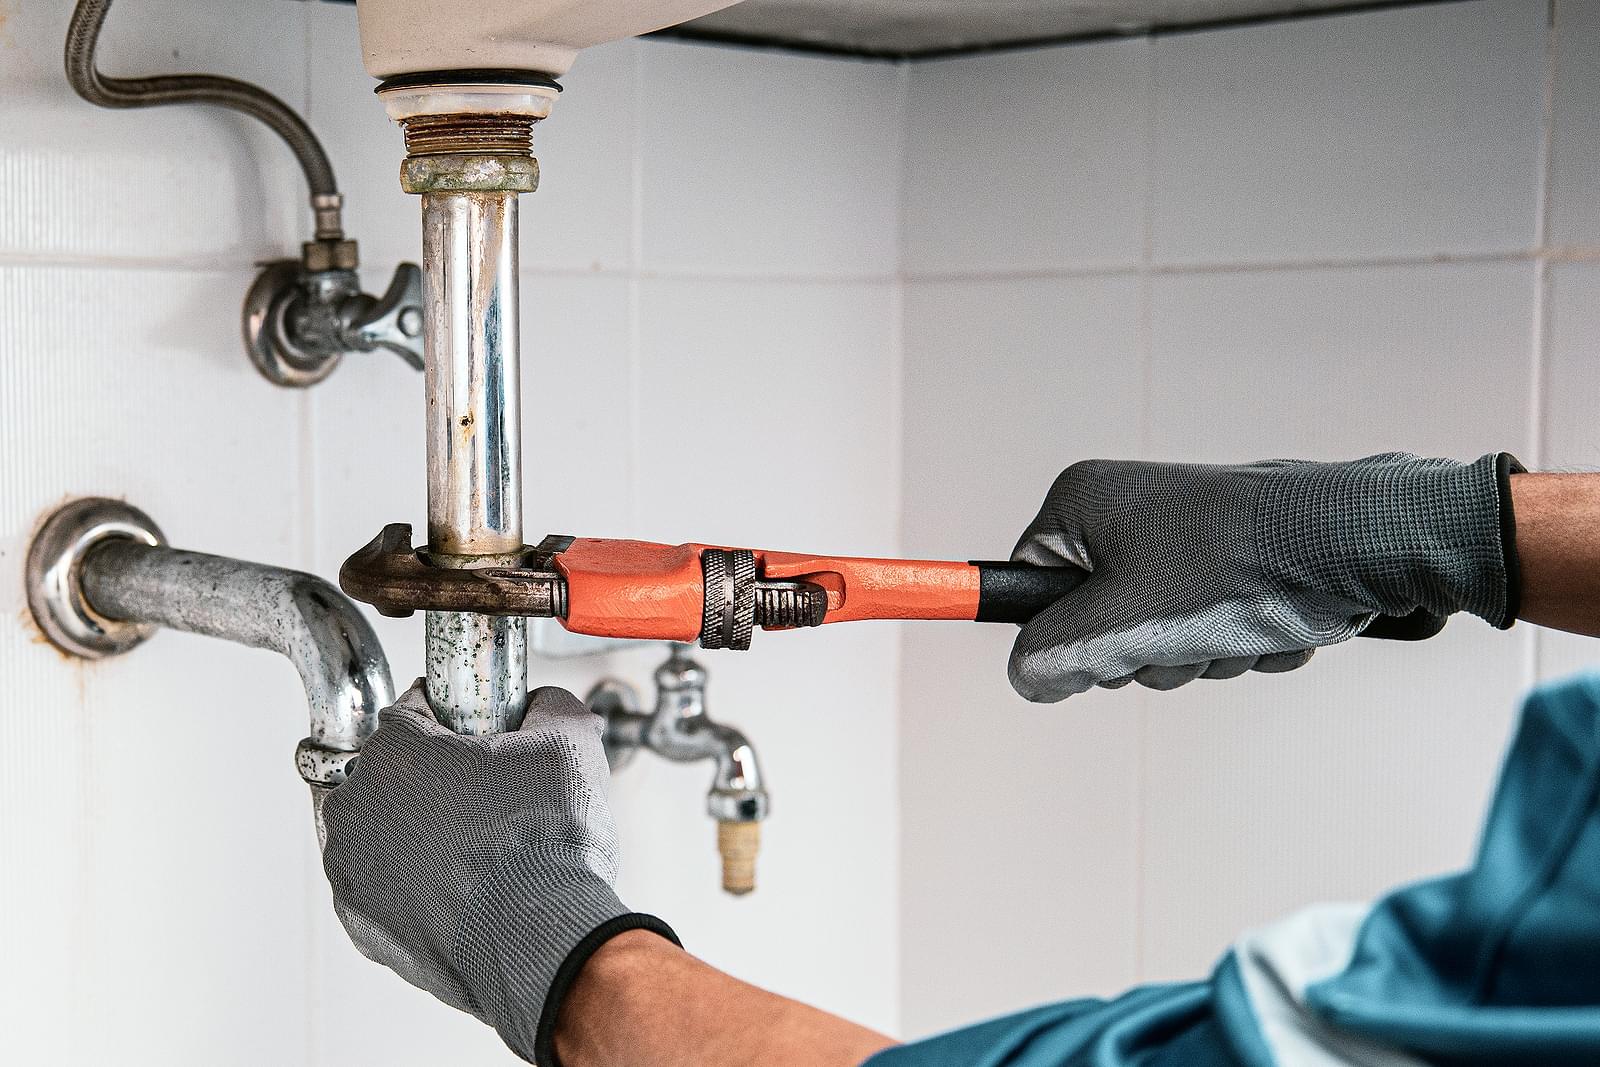 A pair of gloved hands repairing the plumbing under the sink